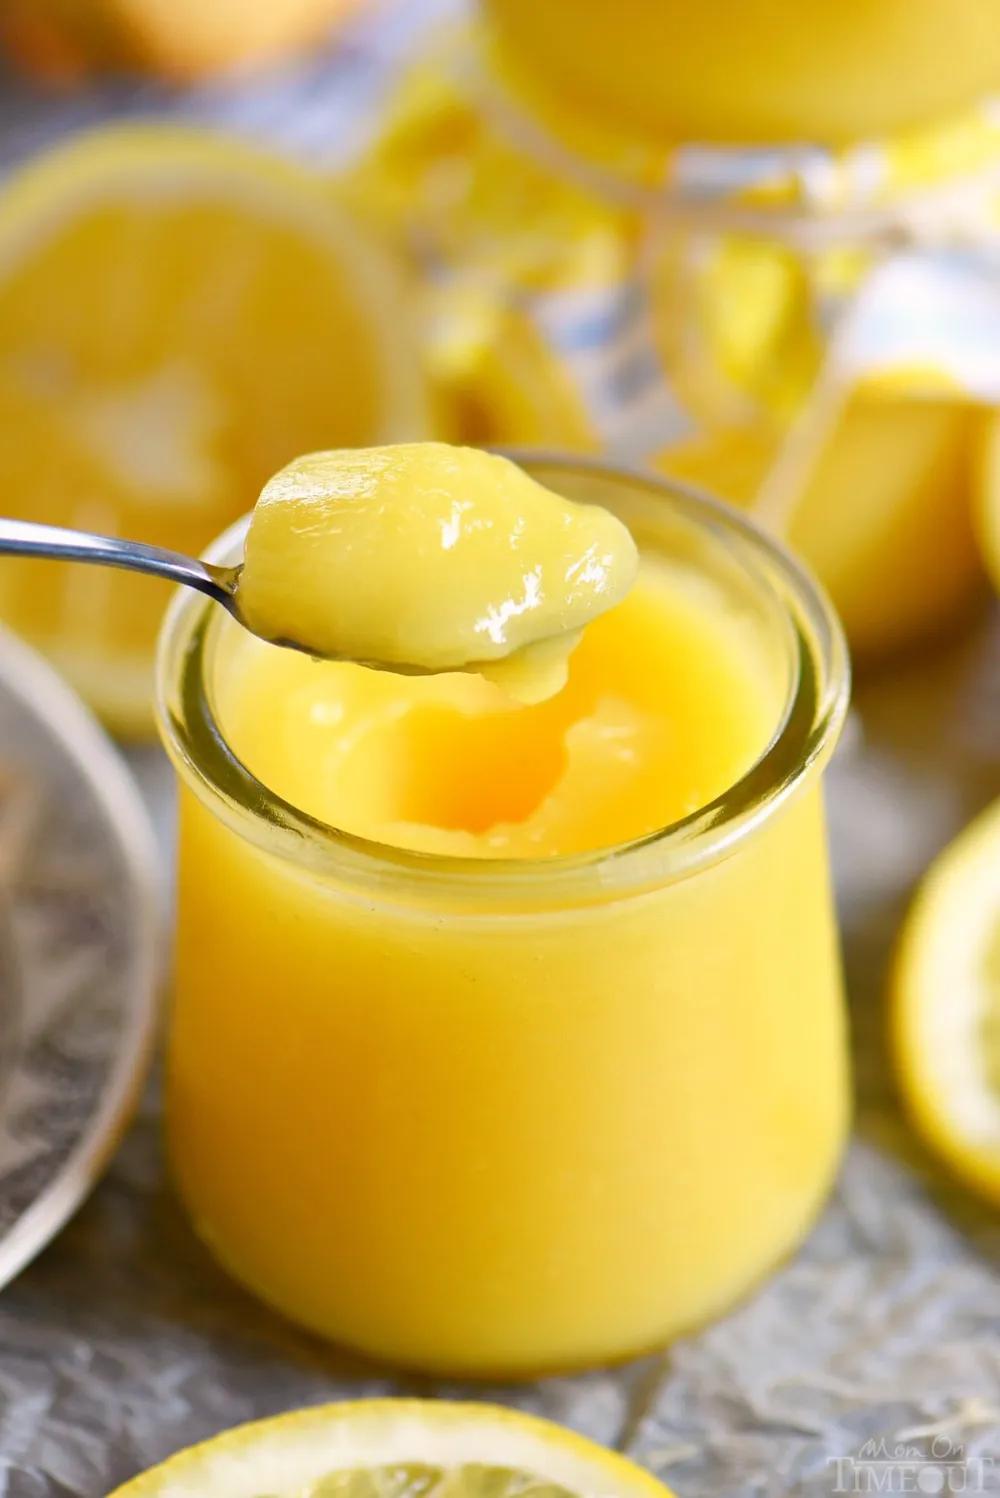 This incredibly easy Lemon Curd recipe is sweet, tart, silky smooth and ...